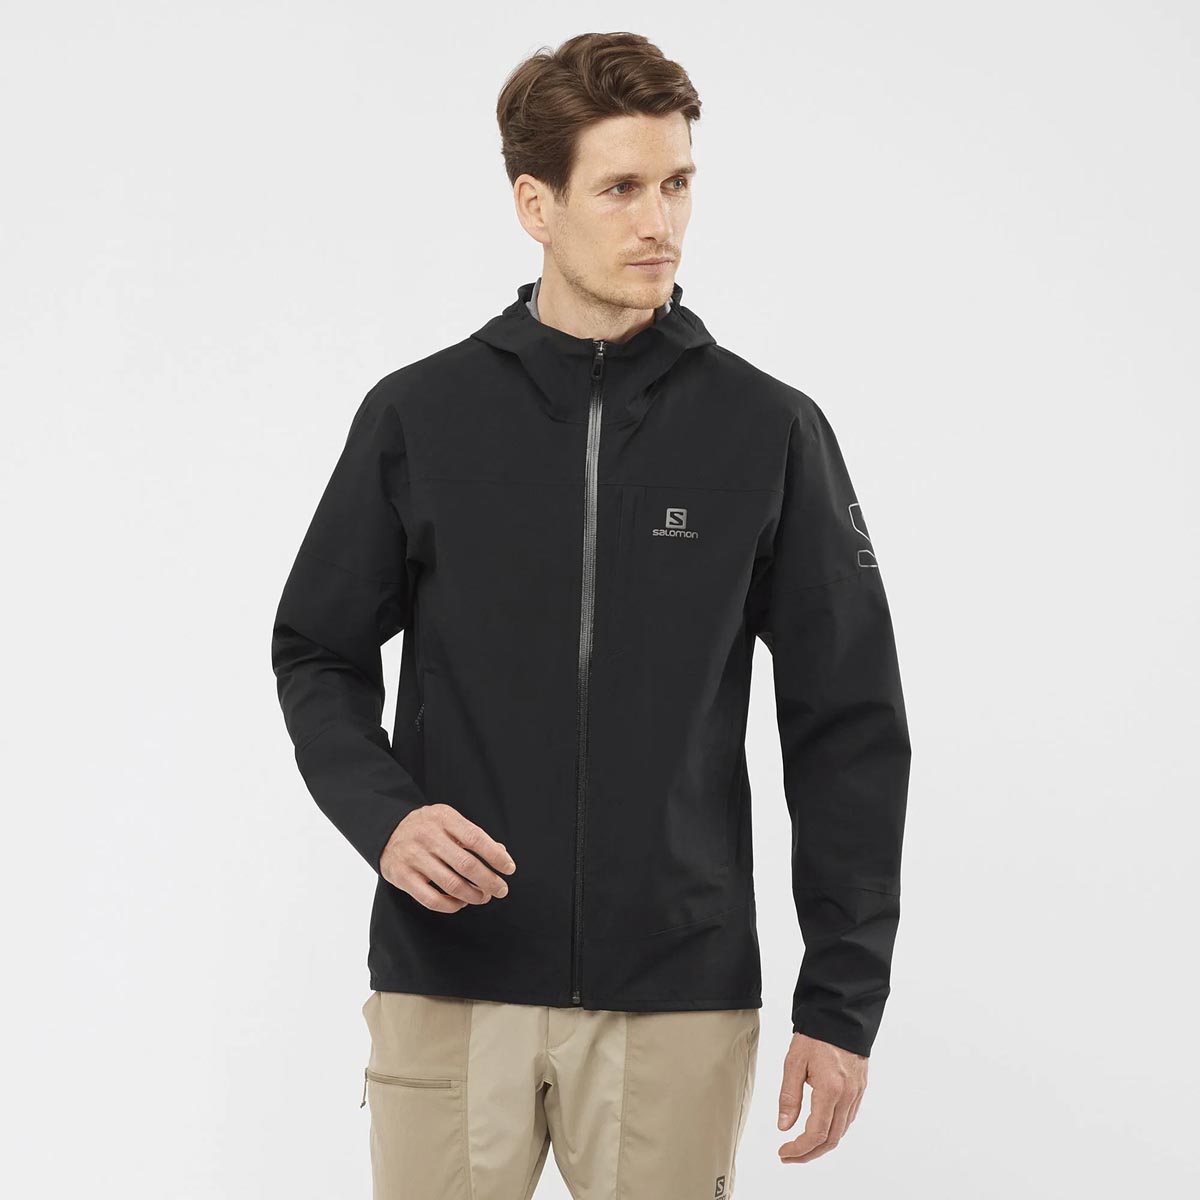 OUTRACK 2.5L JACKET M